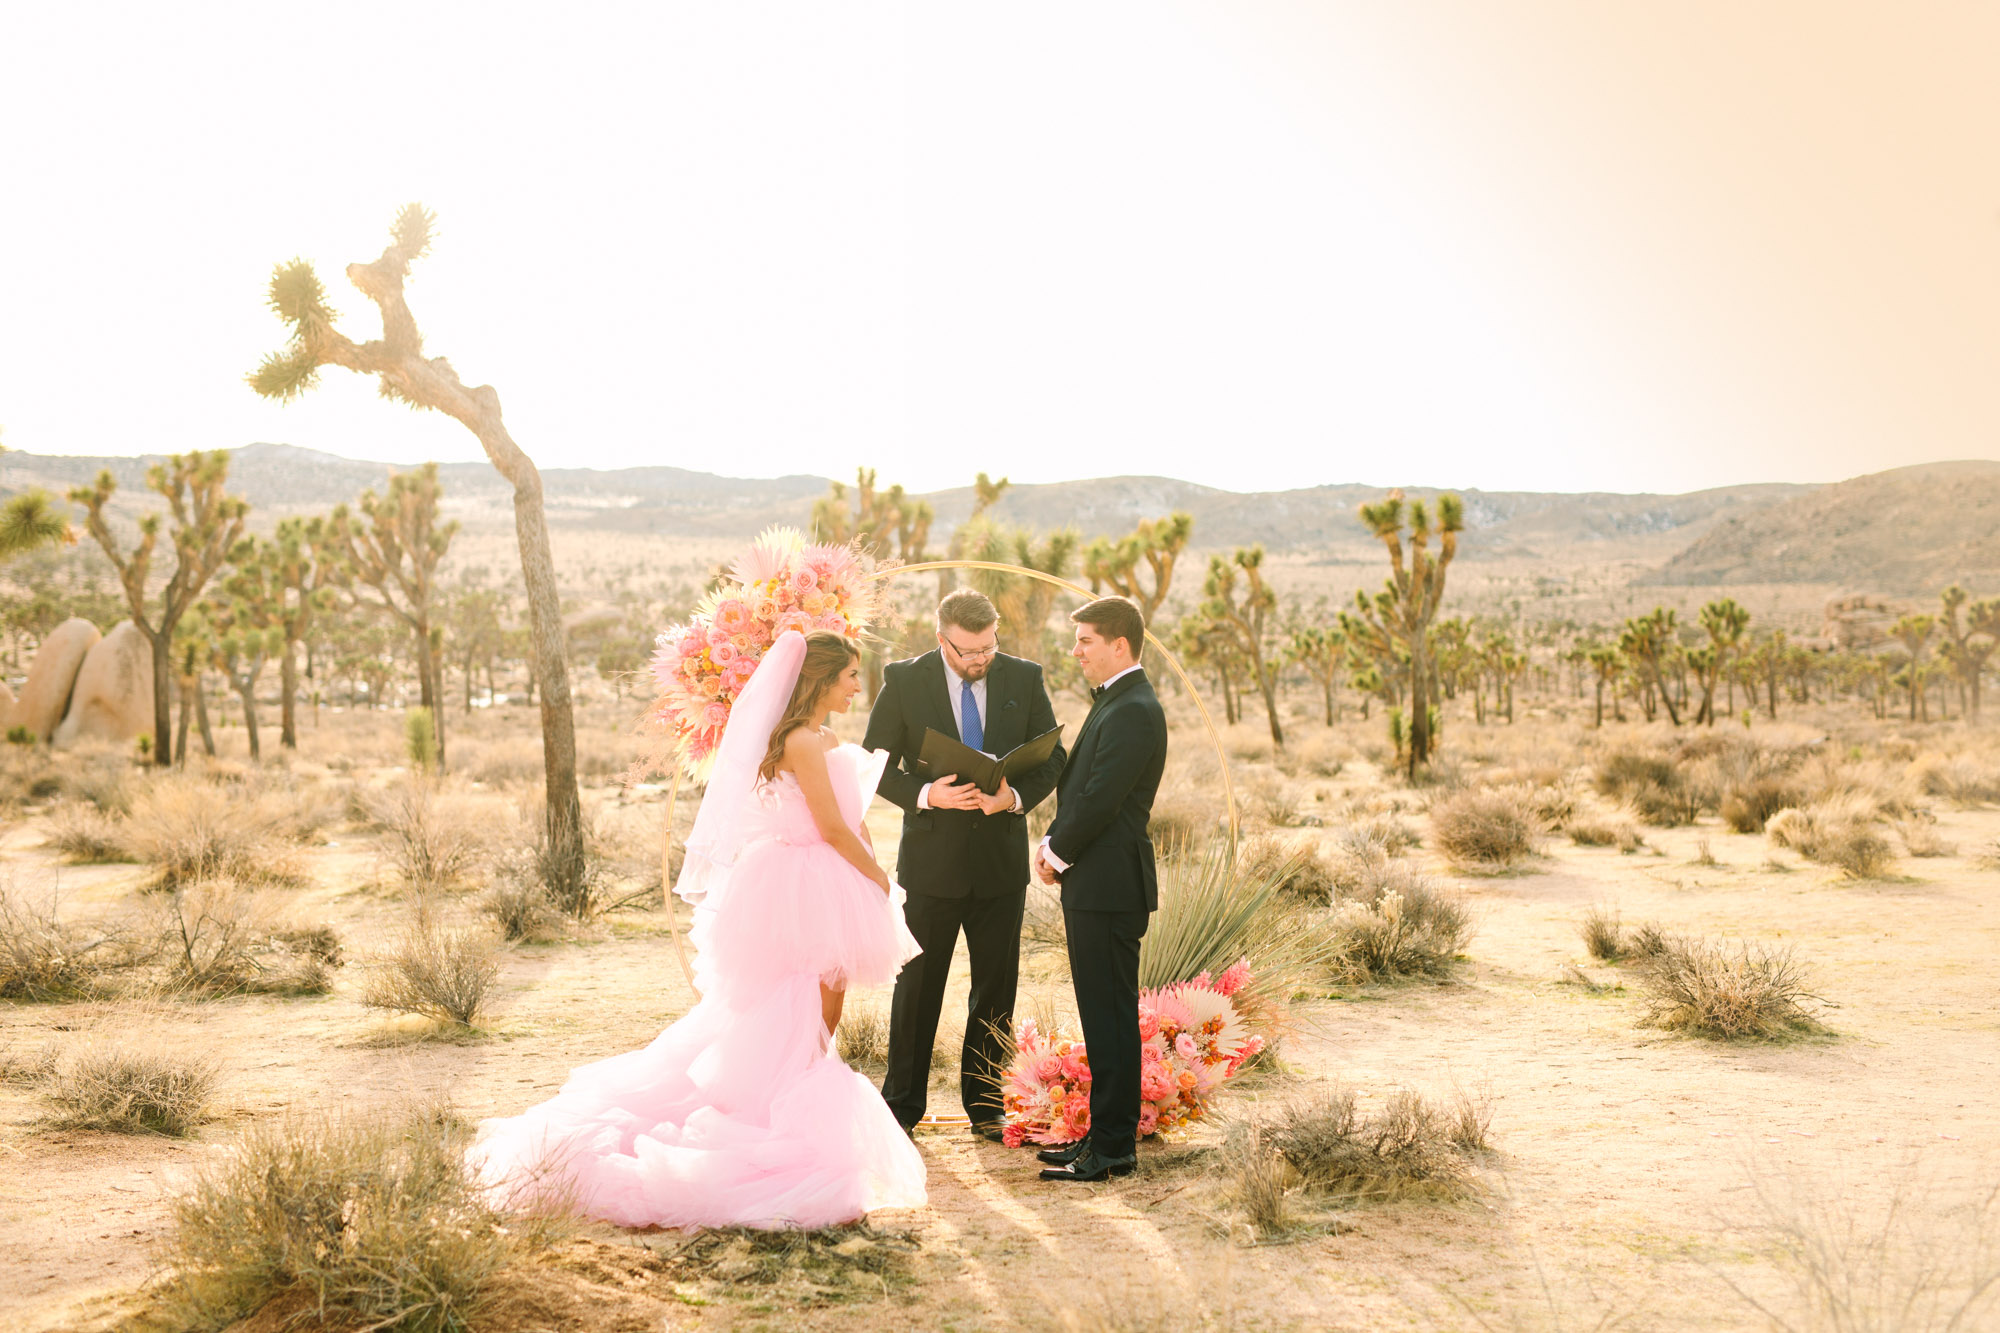 Pink wedding dress Joshua Tree elopement featured on Green Wedding Shoes | Colorful desert wedding inspiration for fun-loving couples in Southern California #joshuatreewedding #joshuatreeelopement #pinkwedding #greenweddingshoes Source: Mary Costa Photography | Los Angeles